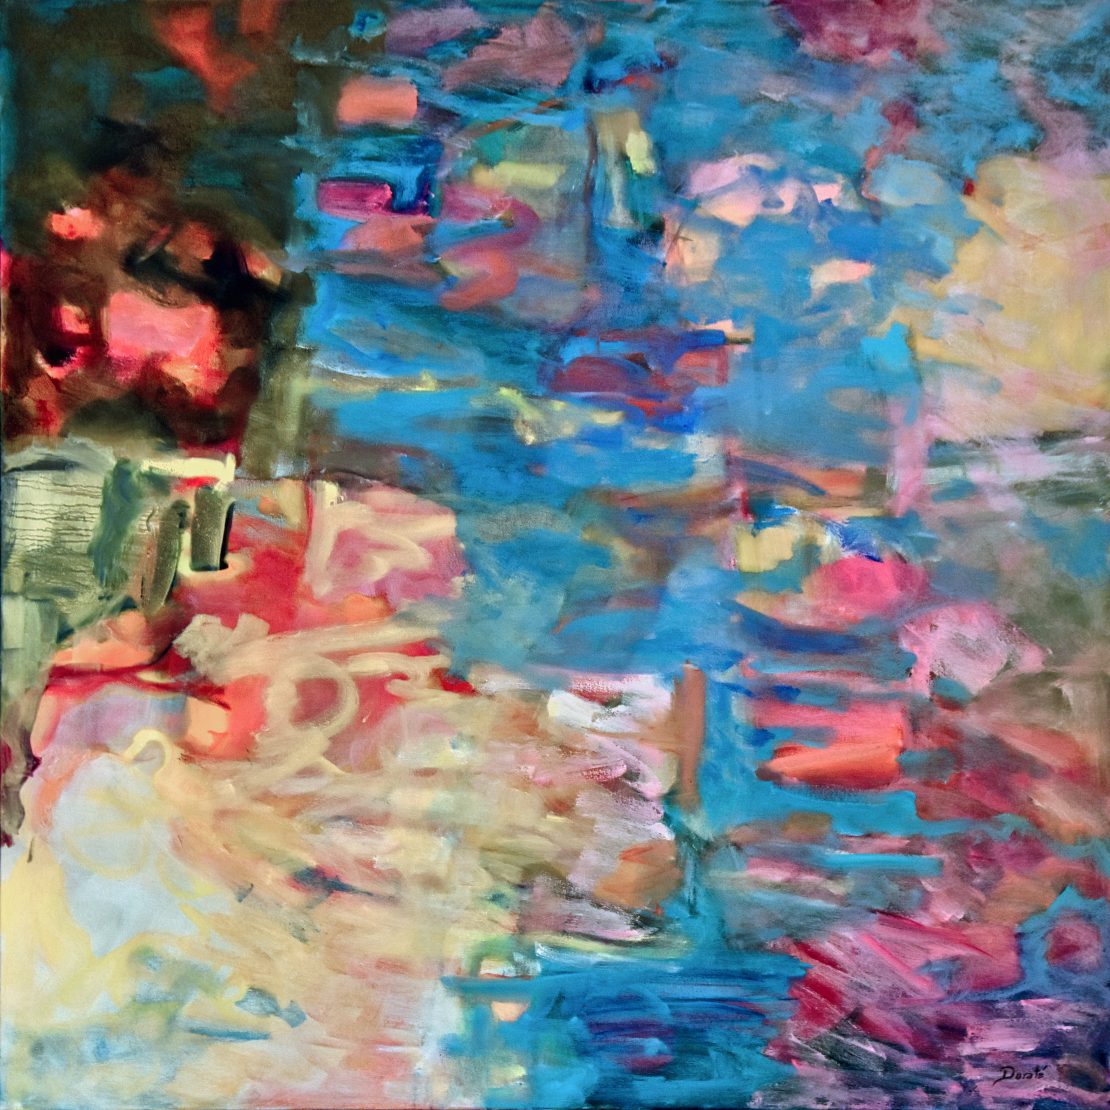 Original Abstract Artwork by Dorate, "Abstract Journey II"